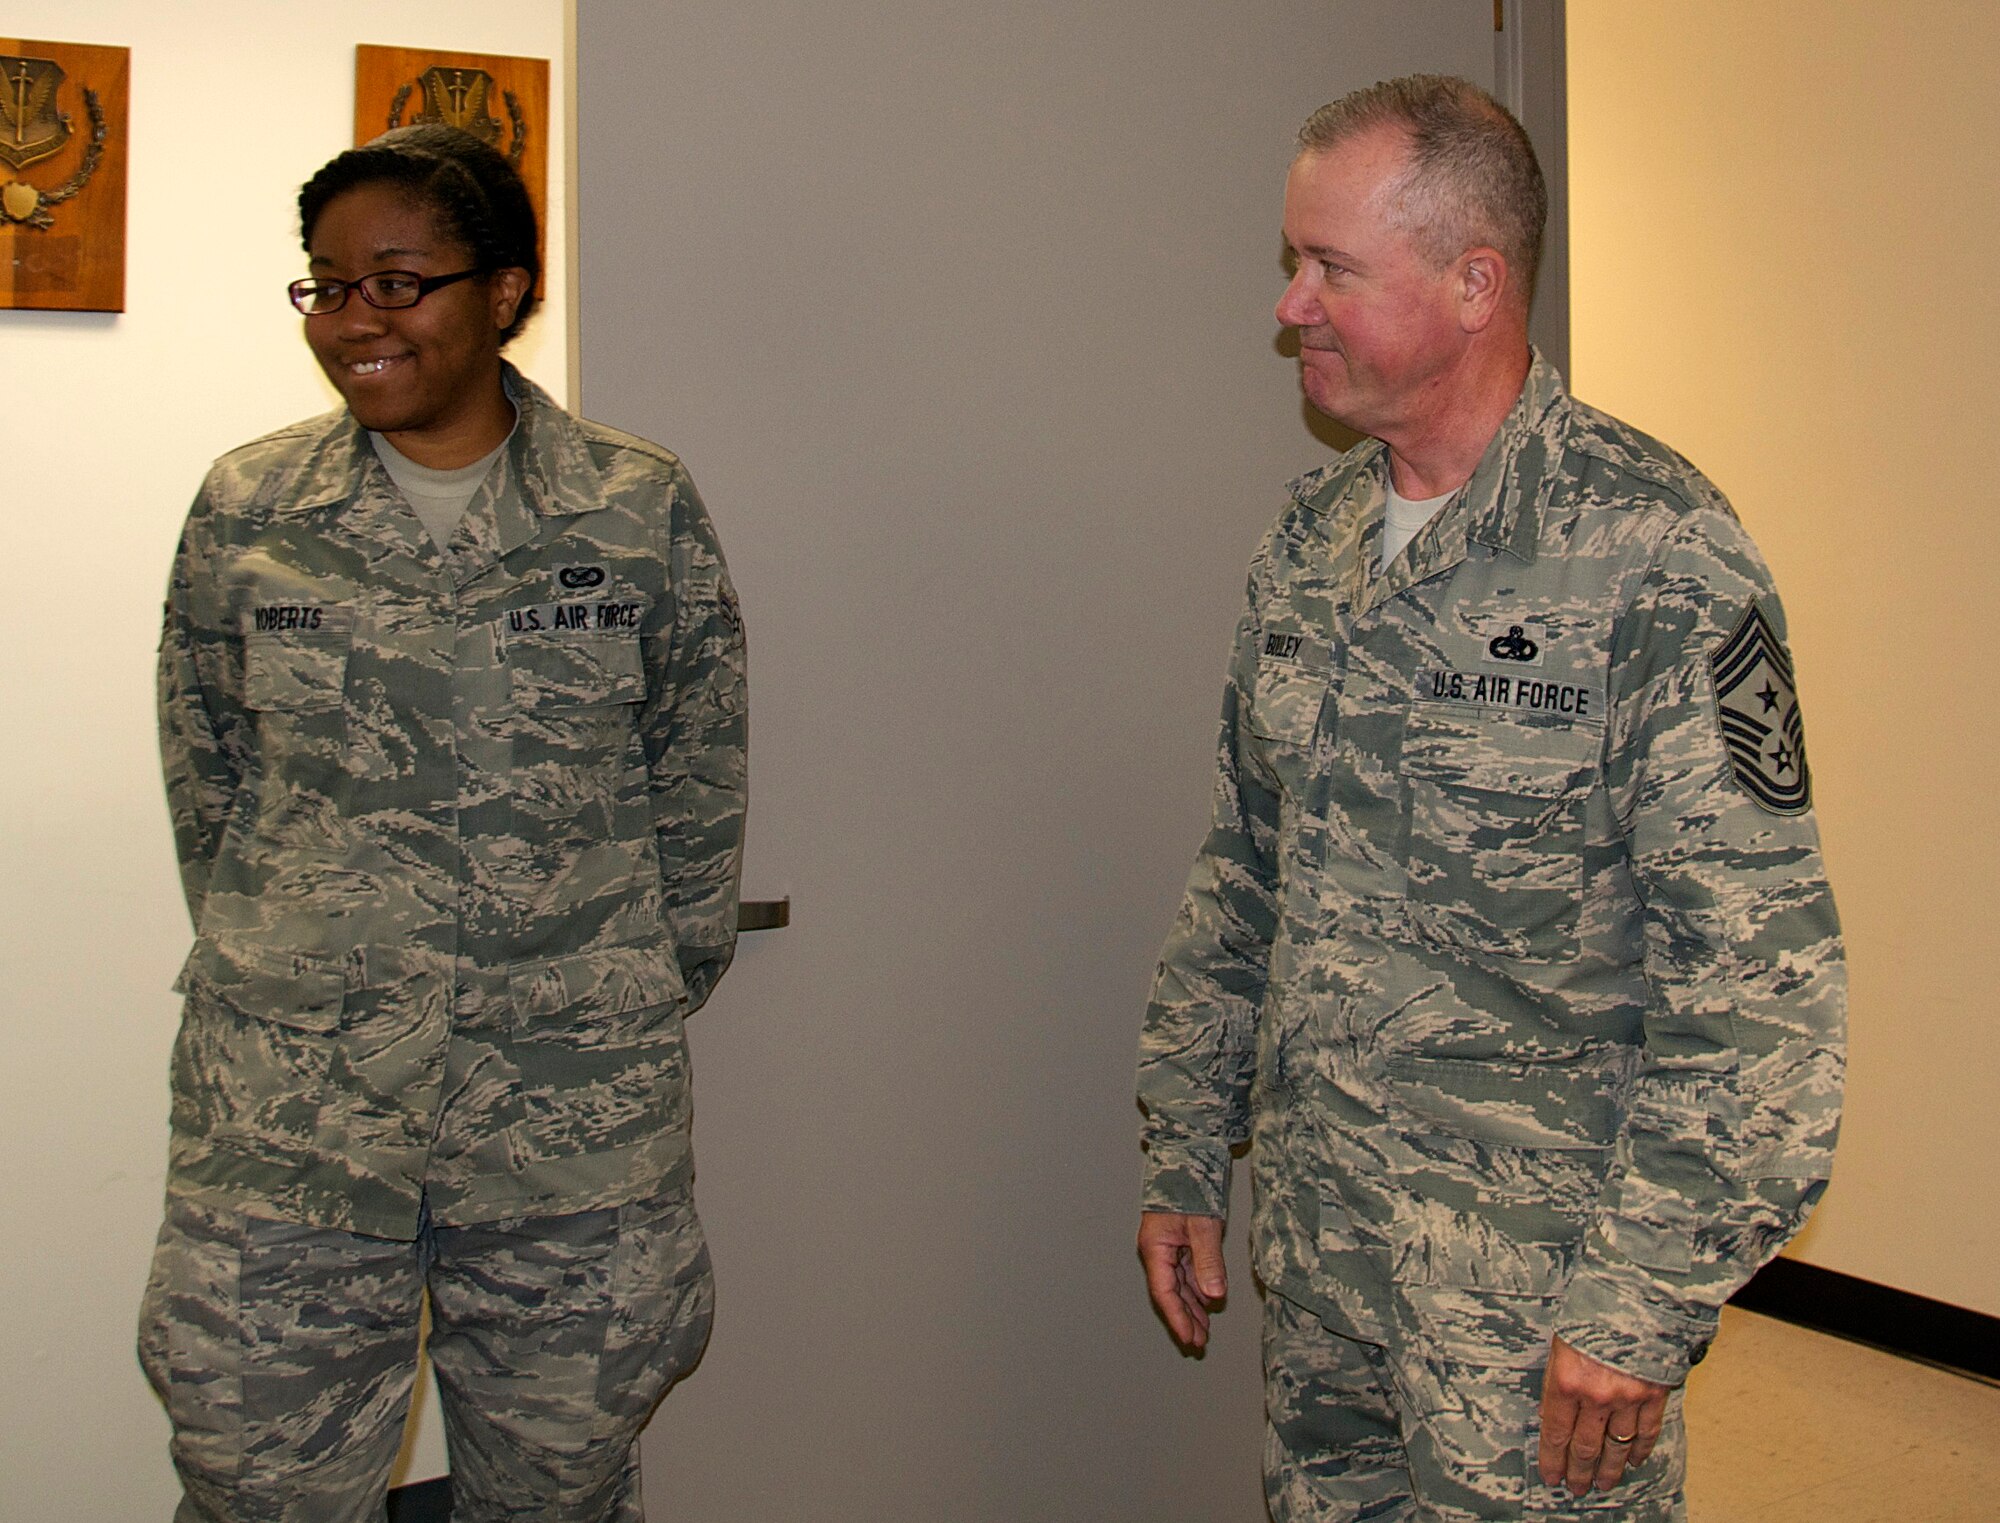 Senior Airman Johnisa B. Roberts, 192nd Fighter Wing Public Affairs photojournalist, received an outstanding performance chip from Command Chief Master Sgt. Michael J. Bouley, 192nd FW command chief, September 13, 2015 at Joint Base Langley-Eustis, Virginia. Chief Bouley coined (“chipped”) Roberts to recognize her for obtaining her Bachelor’s degree in Mathematics, May 2015 from Christopher Newport University in Newport News, Virginia. Roberts is currently continuing her education at CNU as part of a five-year program to obtain her Master’s in the Arts of Teaching. (U.S. Air National Guard photo by Master Sgt. Carlos J. Claudio/Released)